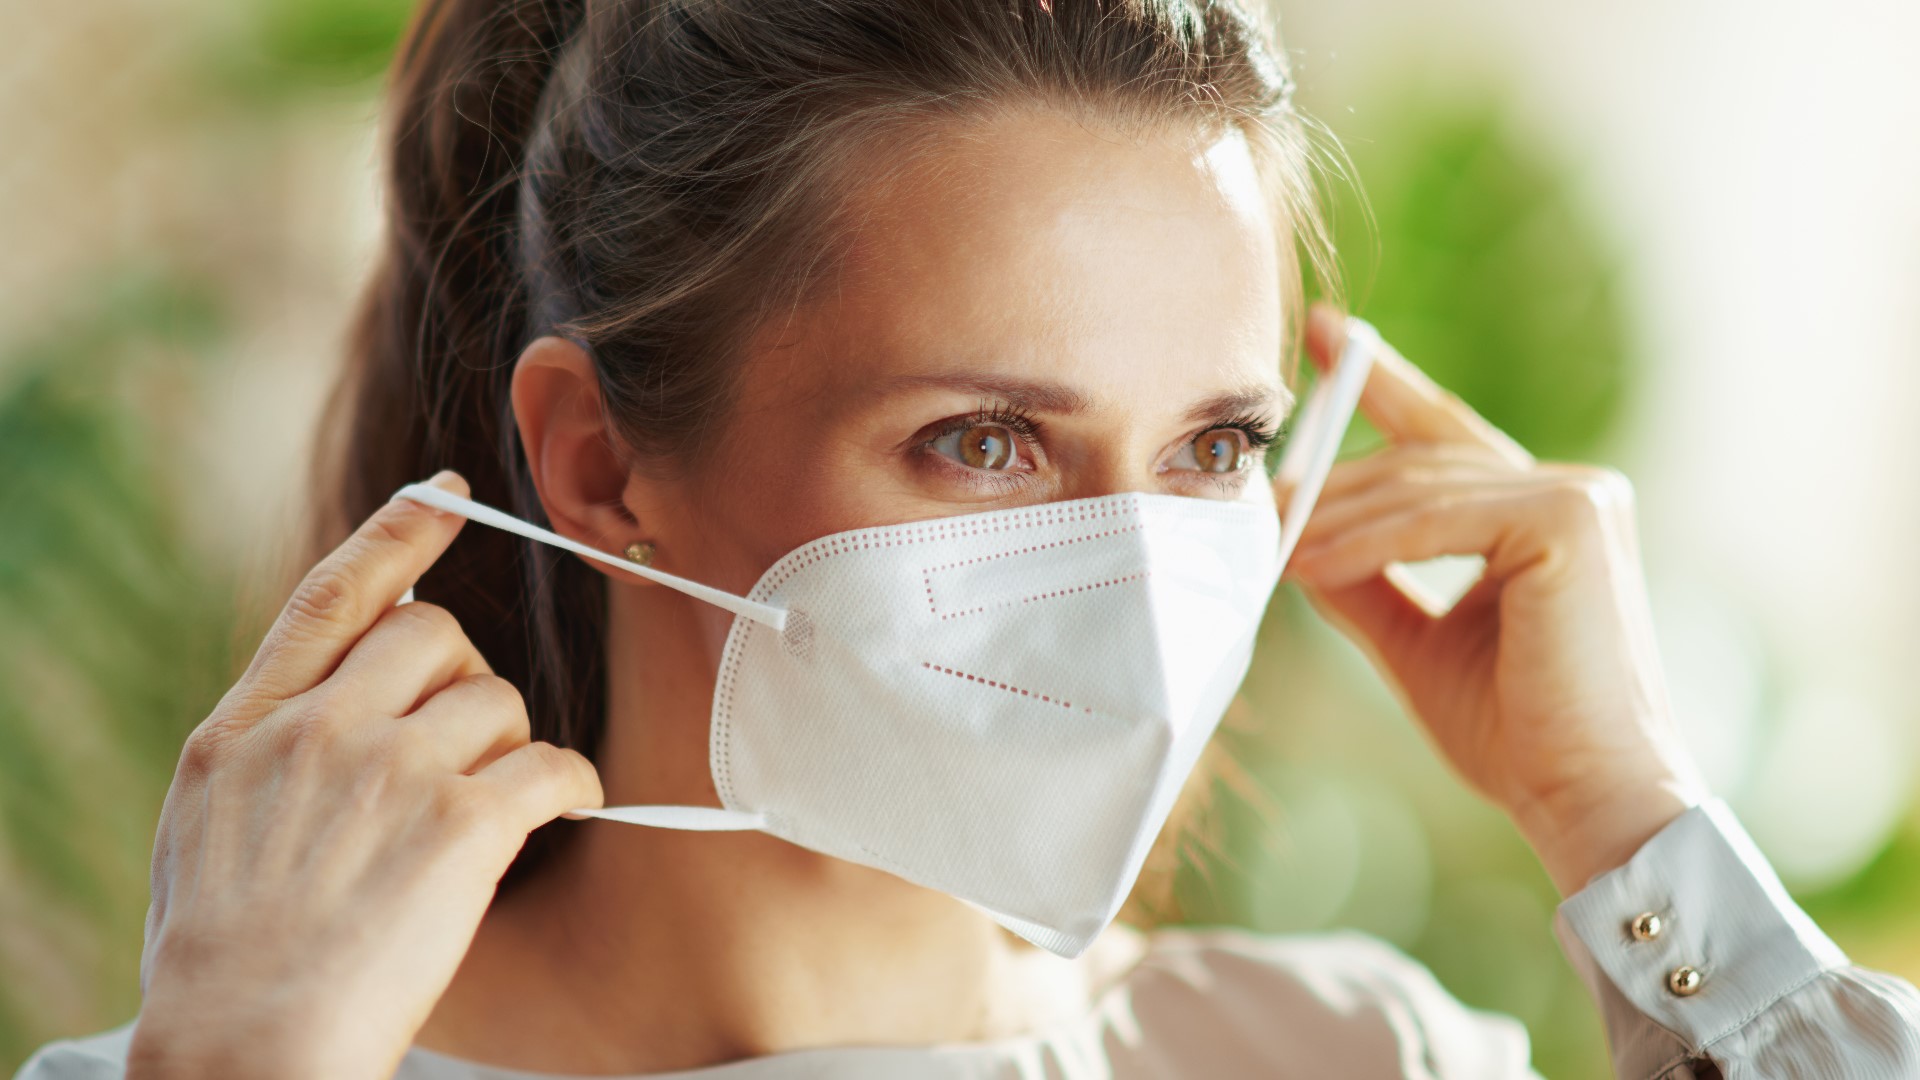 Joe Gastaldo, MD, Medical Director of Infectious Diseases, OhioHealth, suggests some should consider wearing a mask amid flu, COVID and RSV concerns.